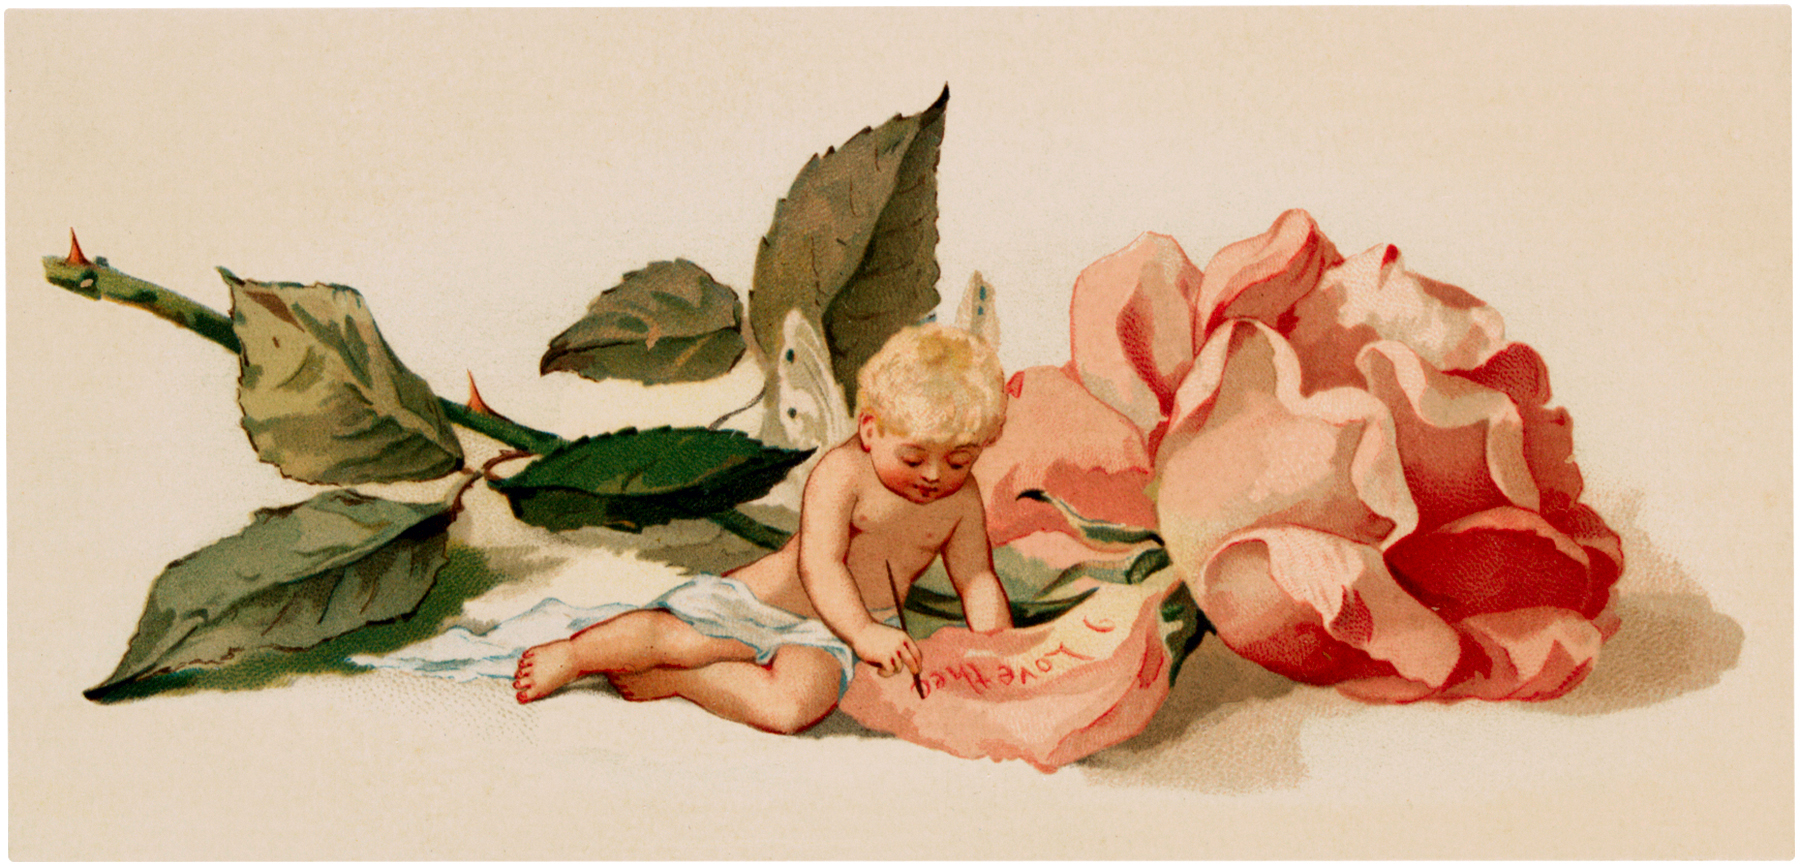 8 Vintage Rosebud Pictures! - The Graphics Fairy